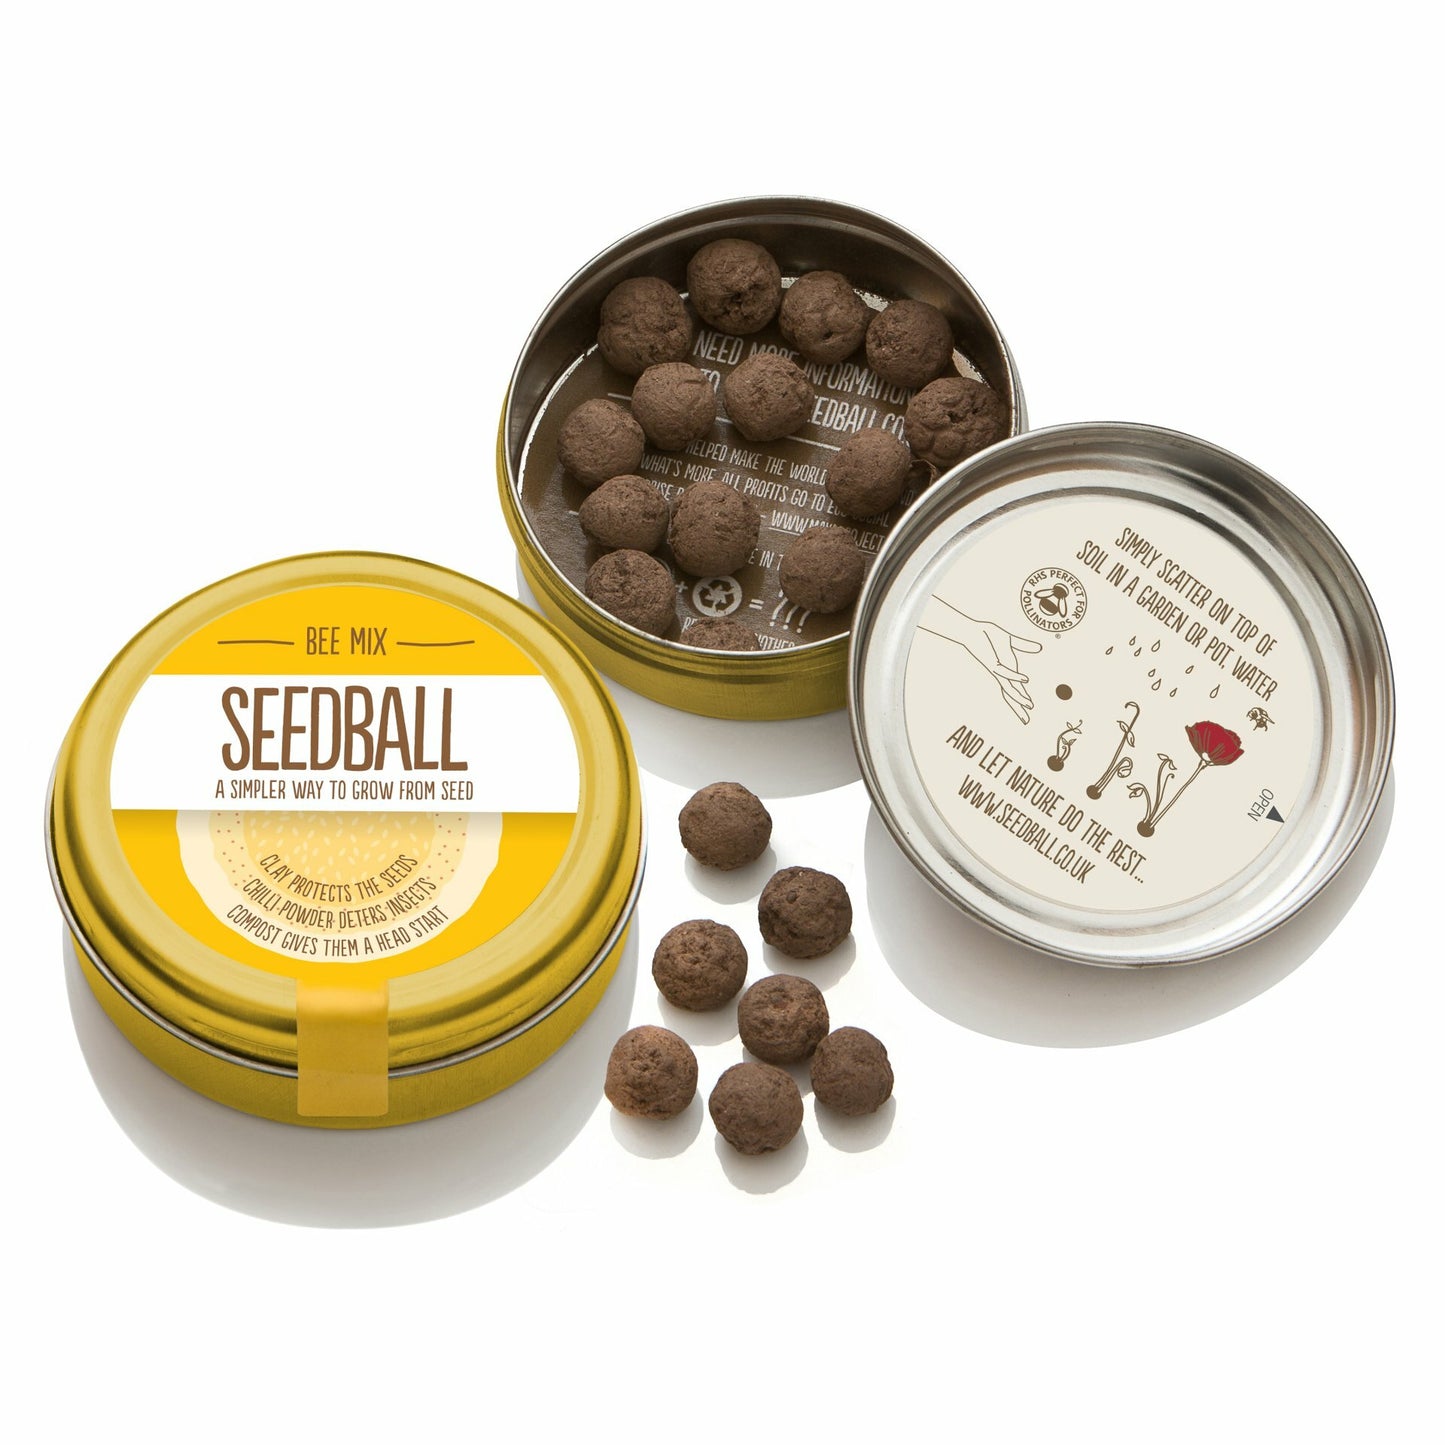 opened tin showing contens of bee mix seedballs gold - available from beevive